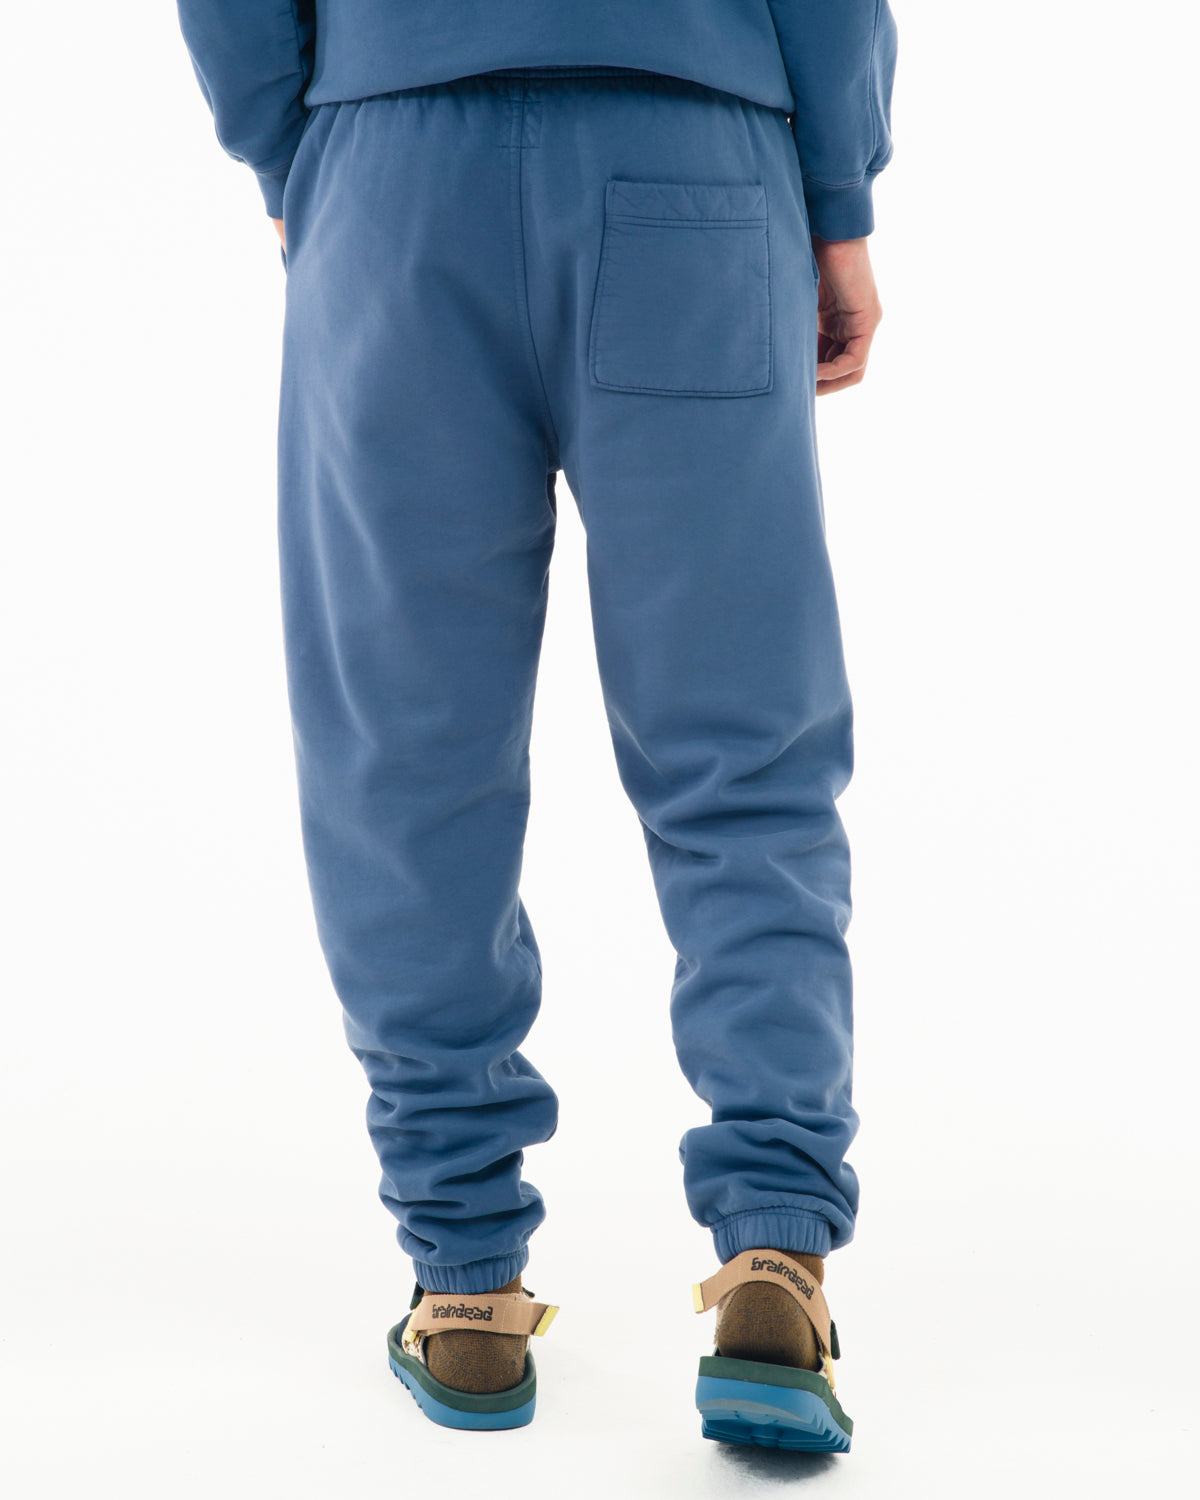 Heavyweight Embroidered Sweatpants - Blue 7